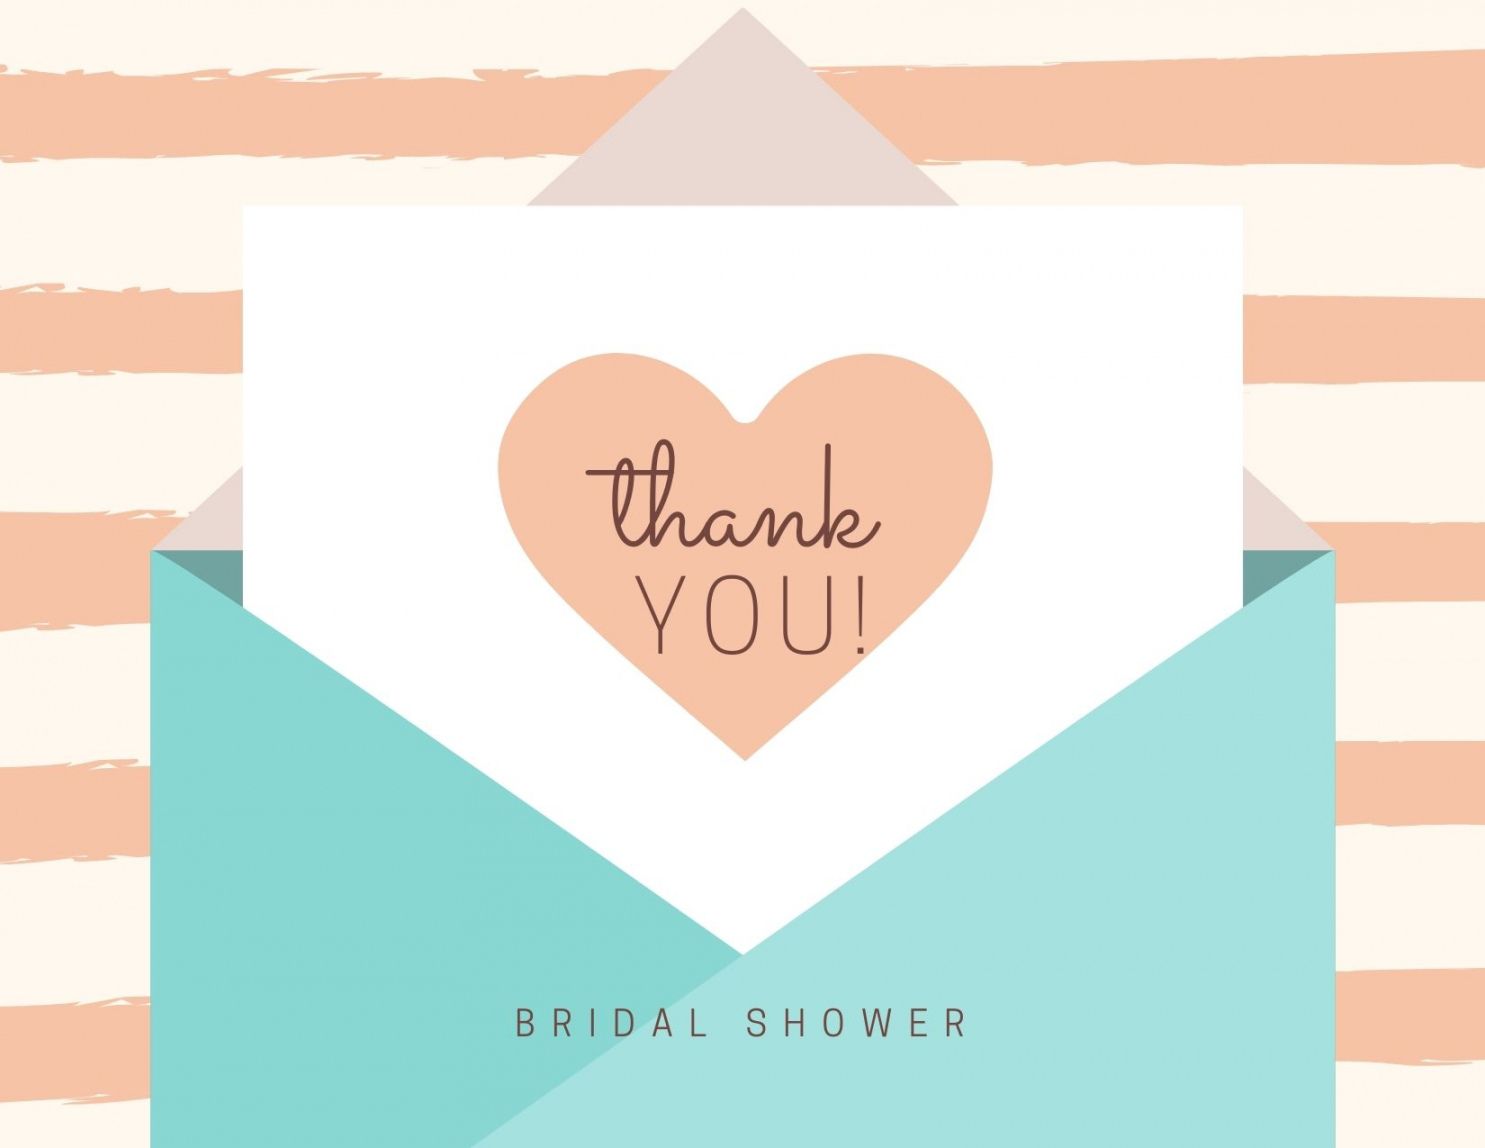 sample of how to write a meaningful bridal shower thank you card thank you card wording for bridal shower hostess picture